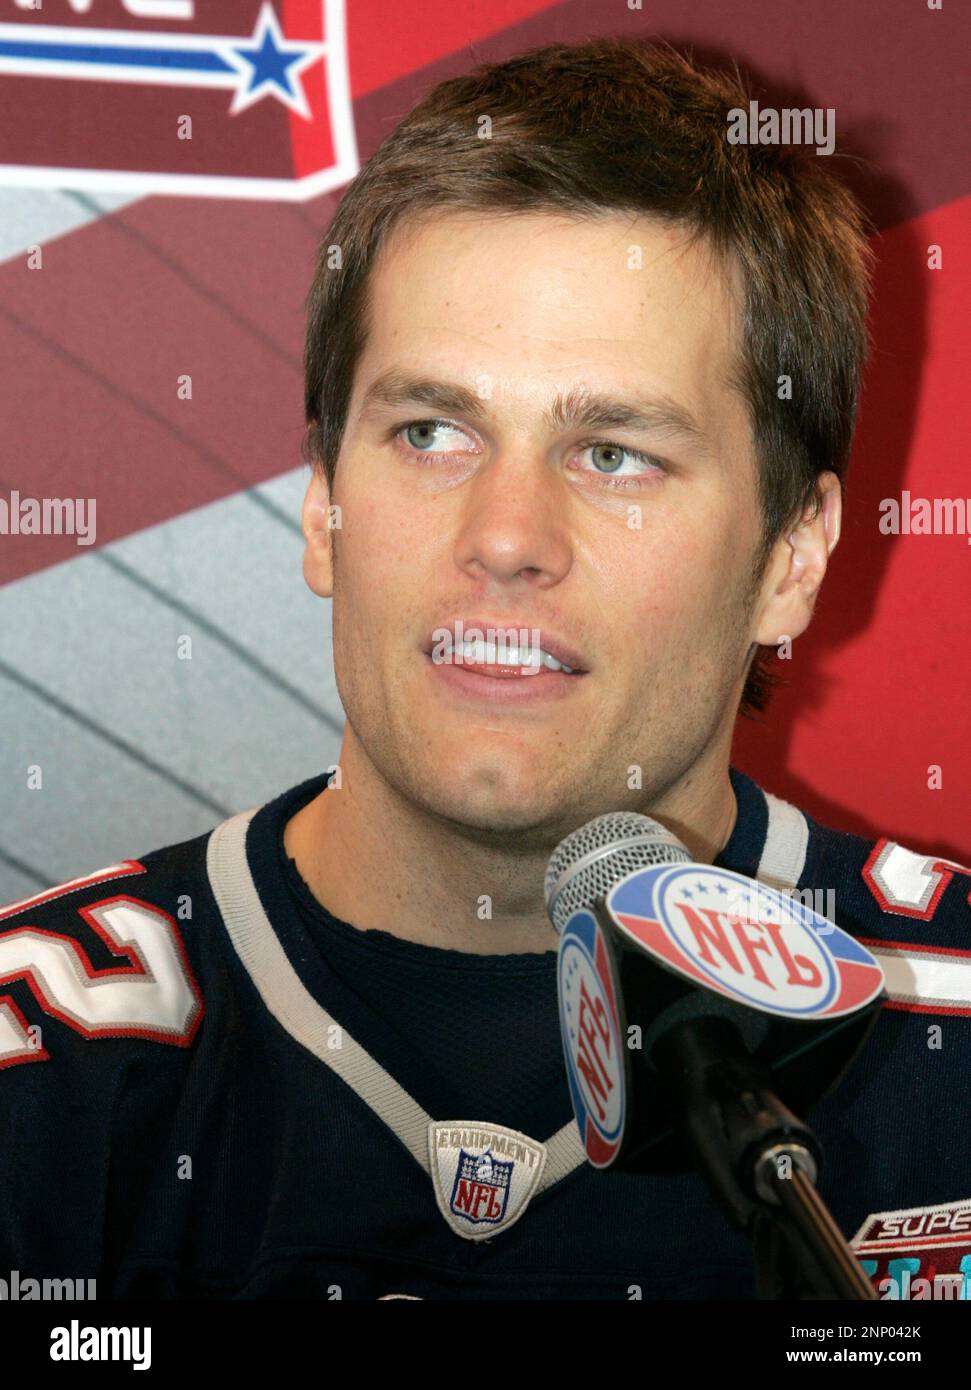 29 January 2008: Tom Brady of the New England Patriots during the 2008  Super Bowl Media Day at the University of Phoenix Stadium in Glendale,  Arizona. (Icon Sportswire via AP Images Stock Photo - Alamy